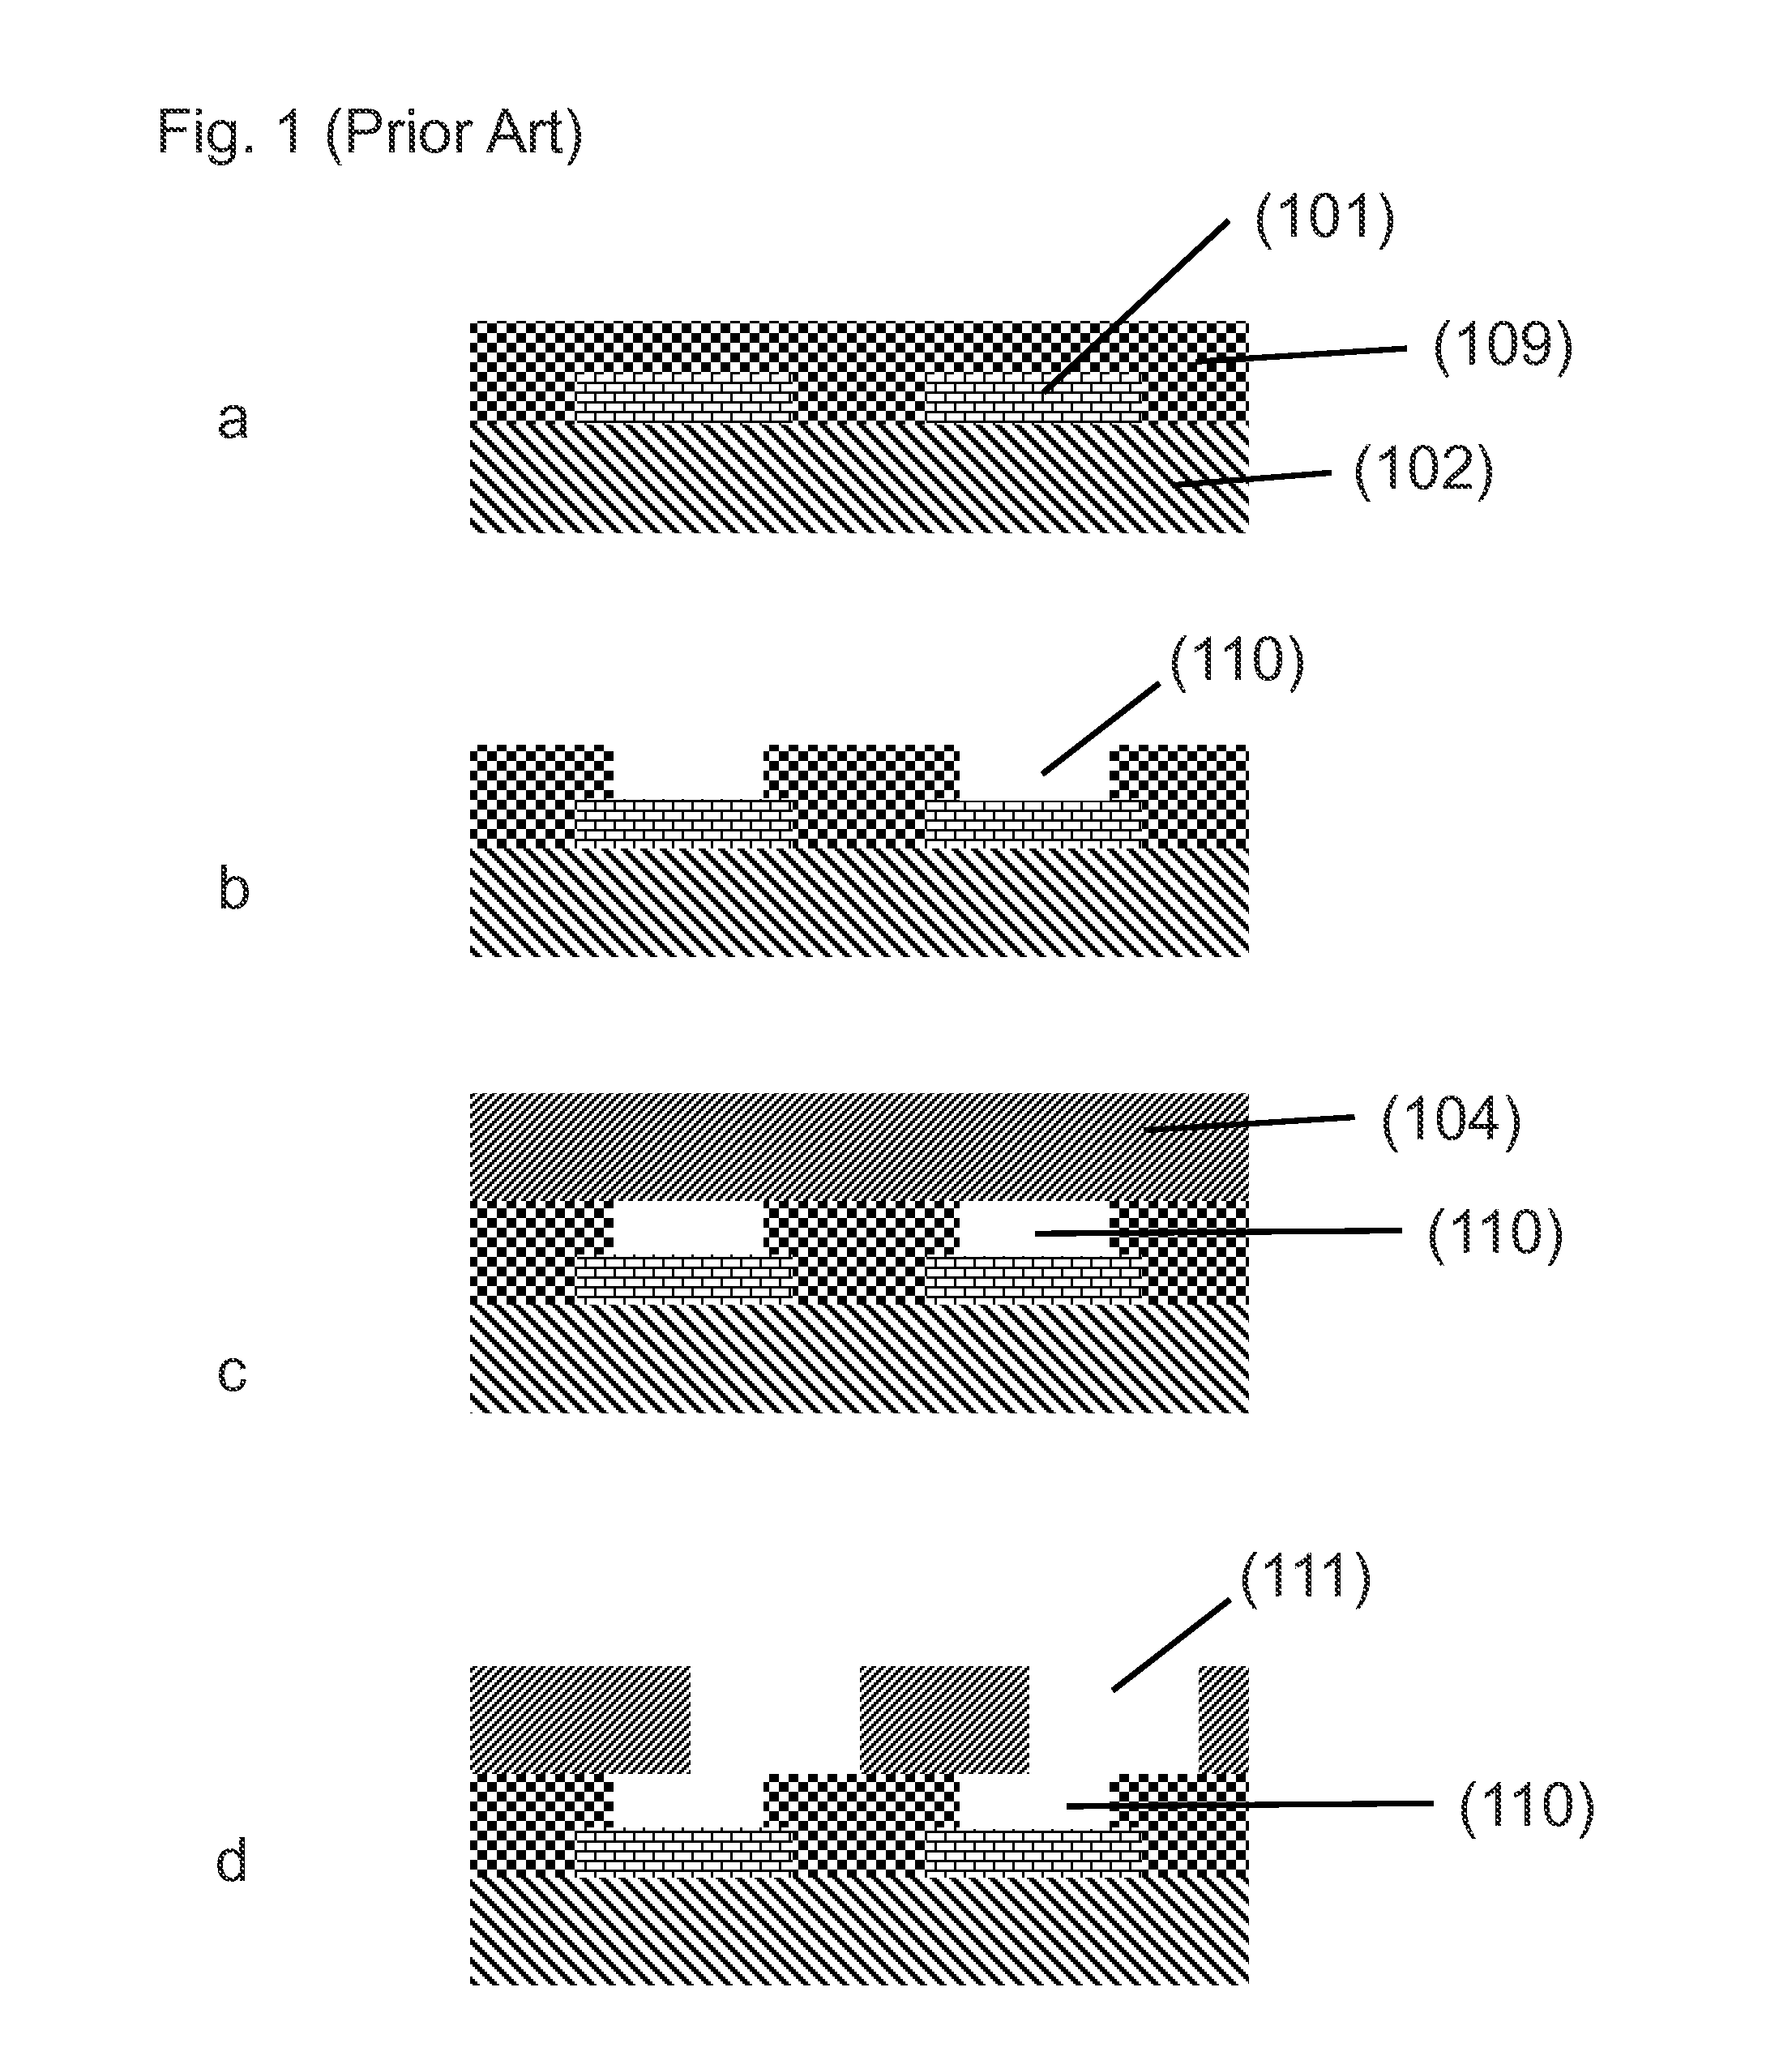 Method to form solder deposits and non-melting bump structures on substrates